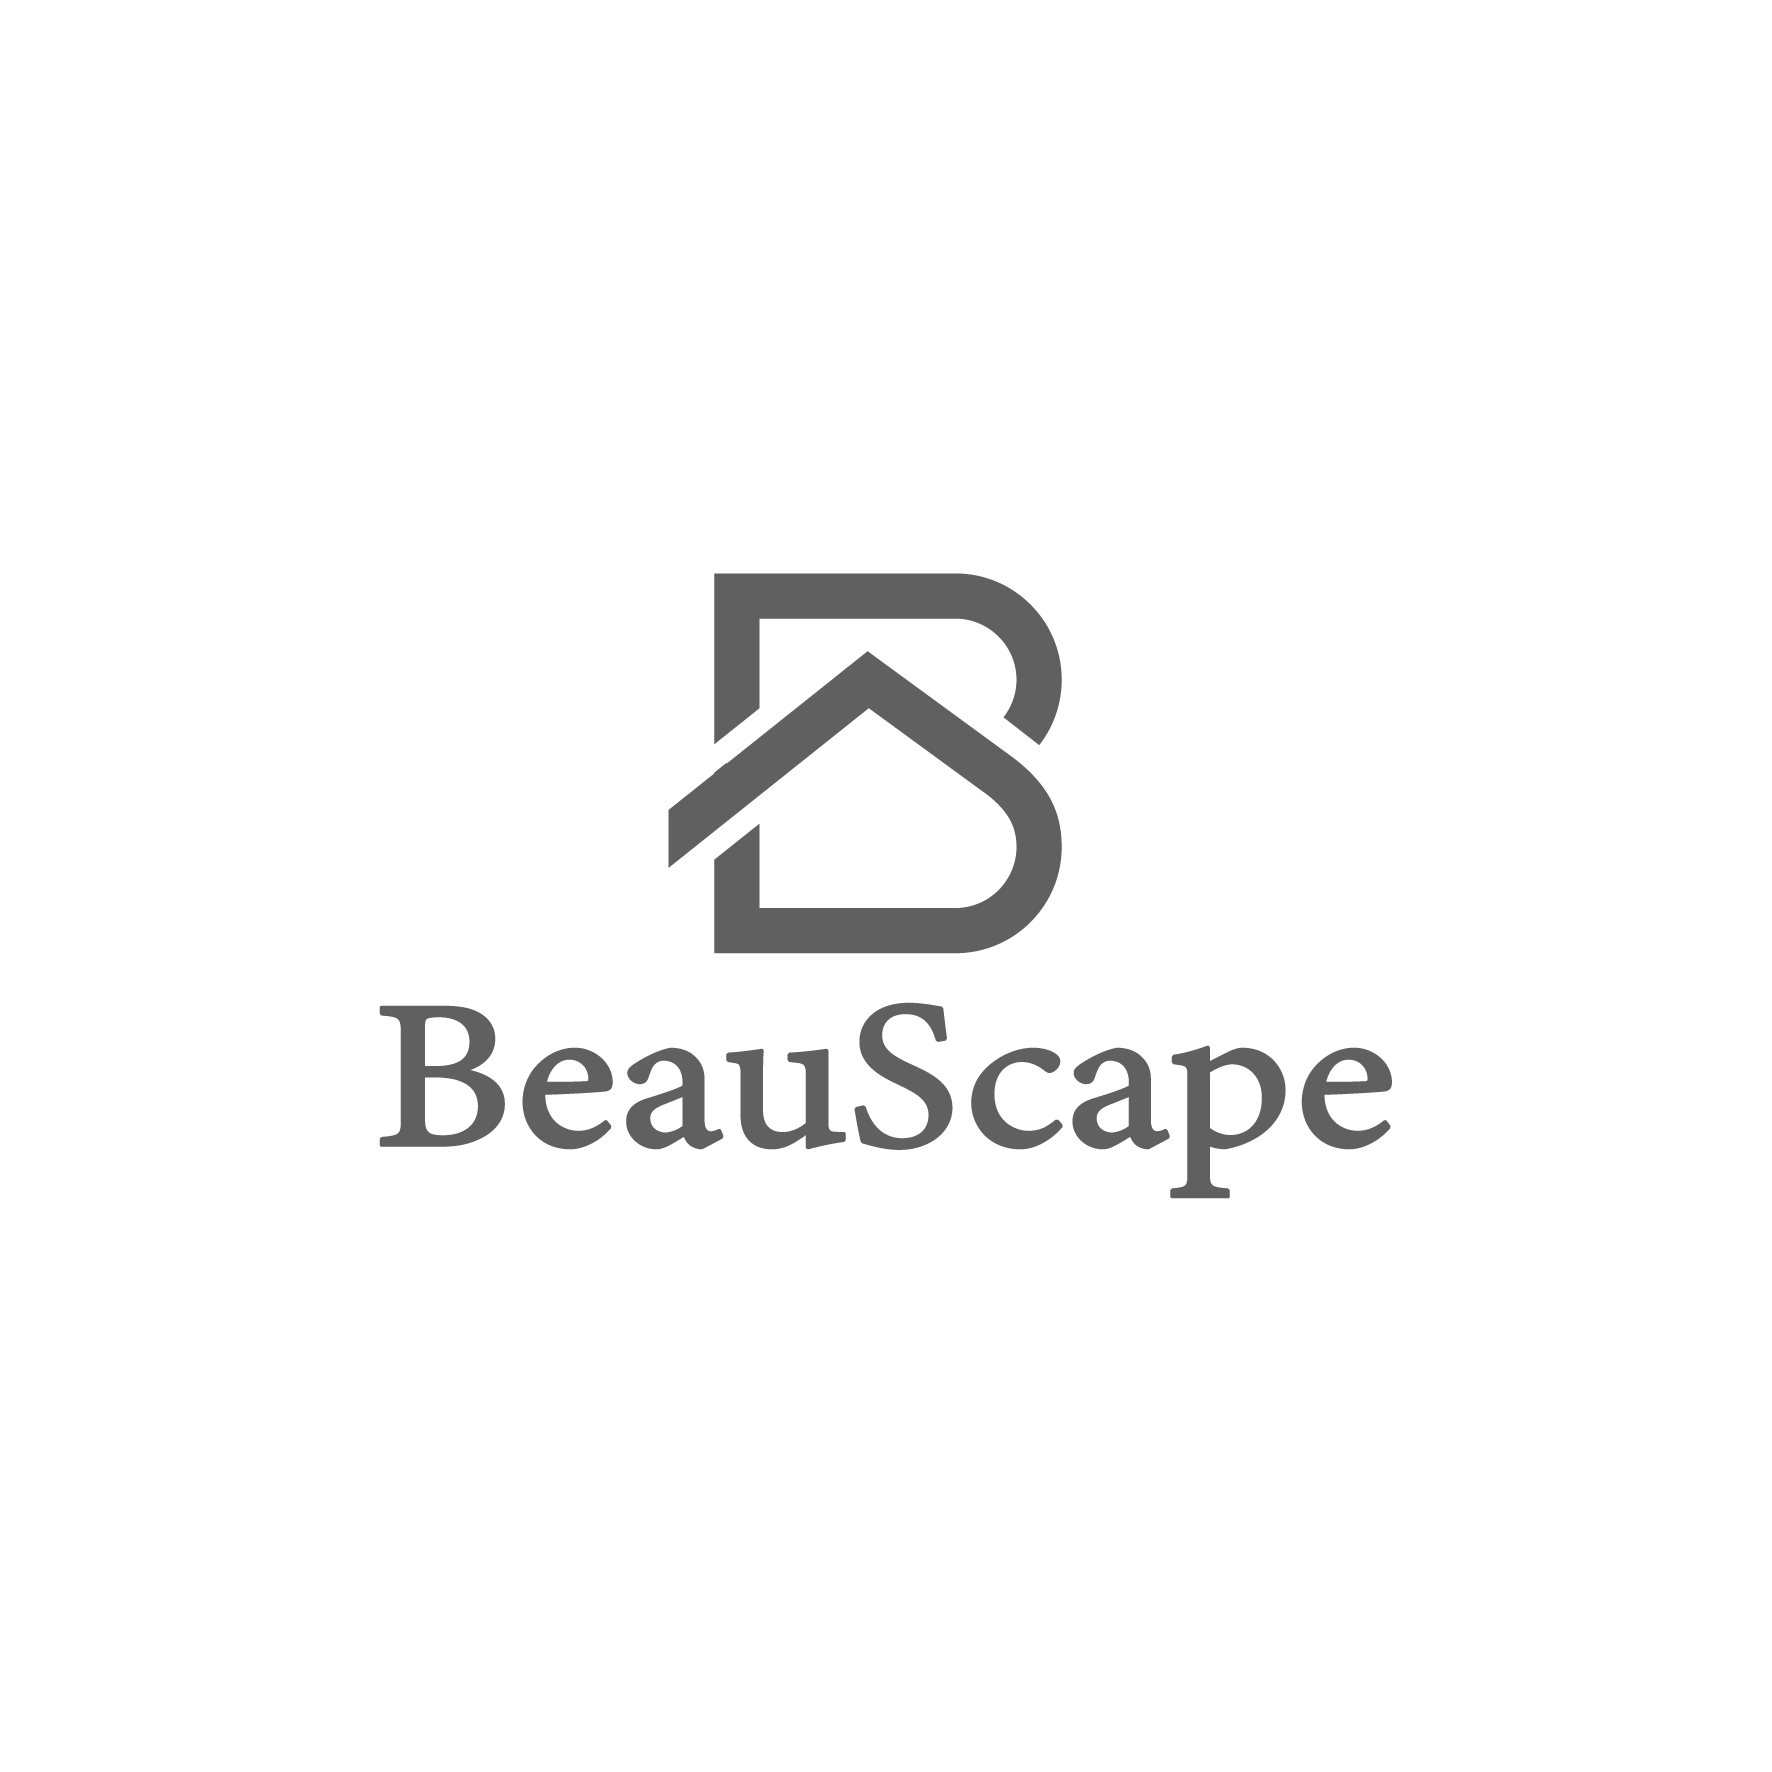 Beauscape's logo